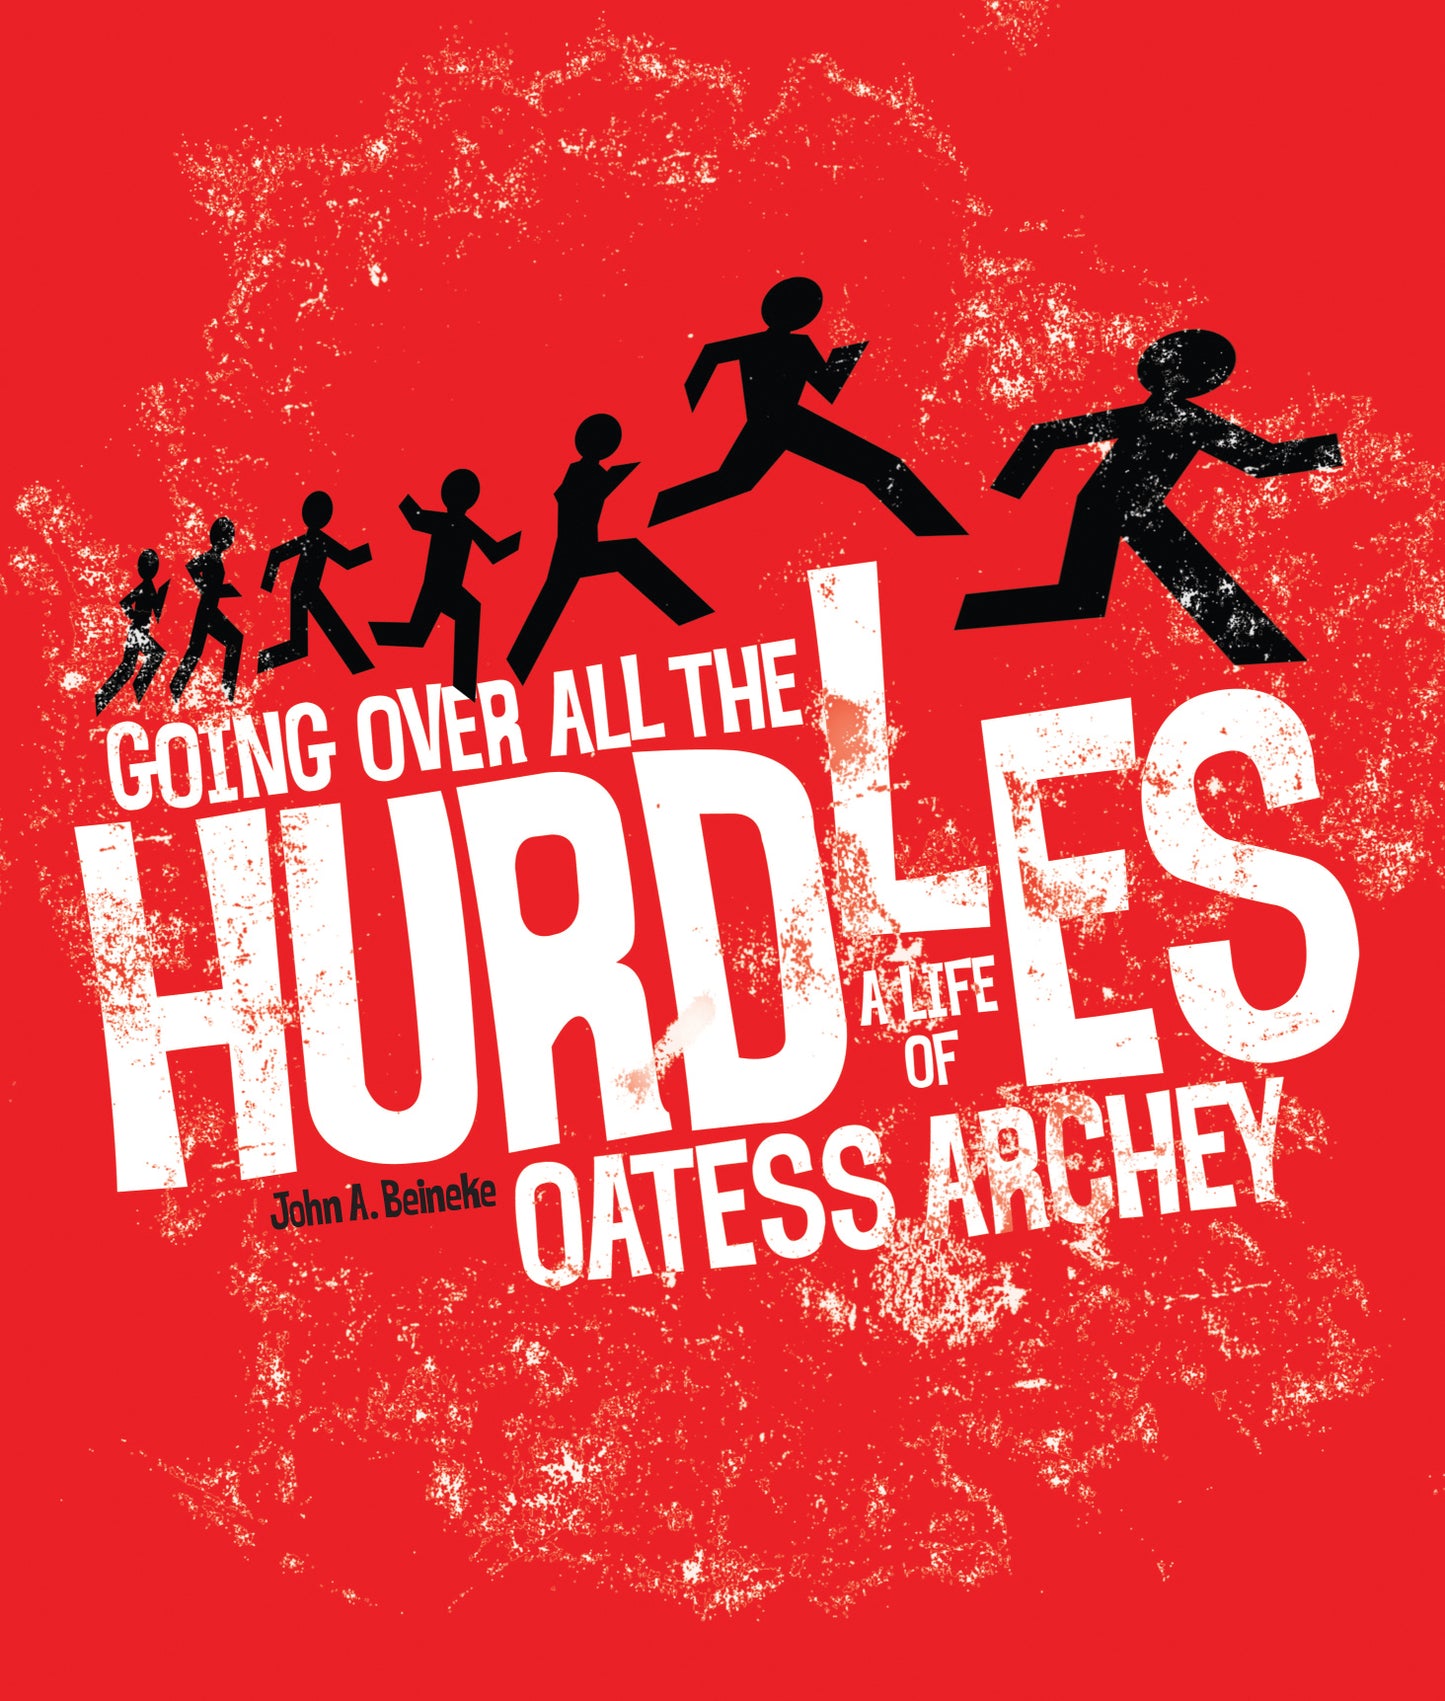 Going over All the Hurdles: A Life of Oatess Archey